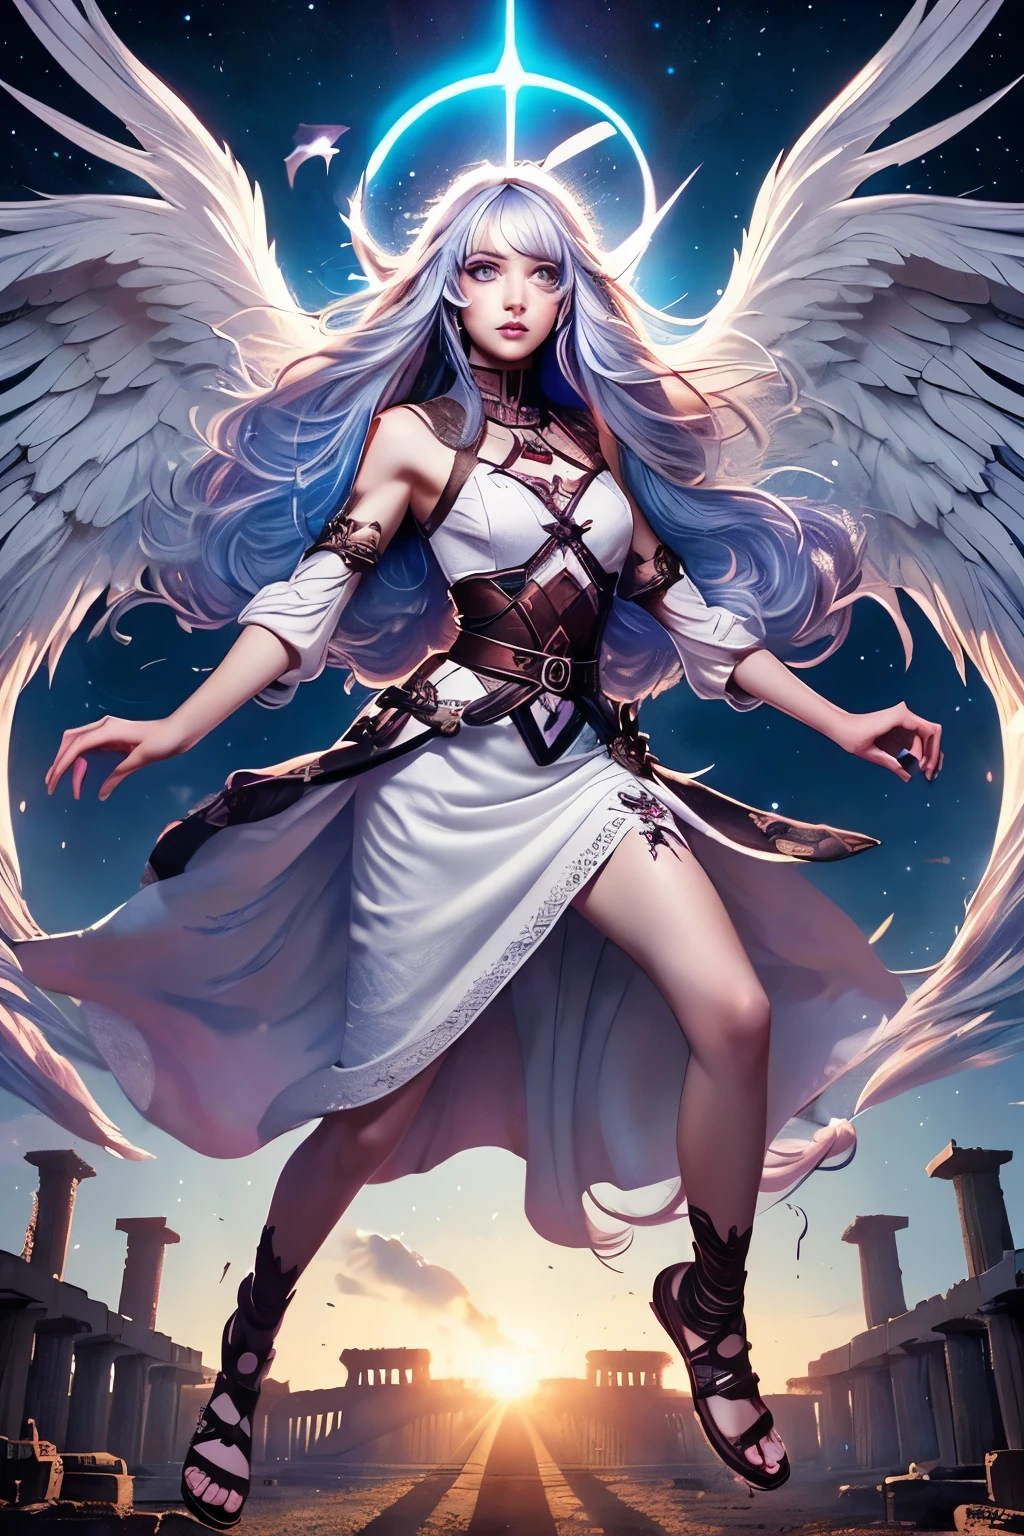 (Ultra-detailed face, roar, shout), (Fantasy Illustration with Gothic & Ukiyo-e & Comic Art), (Full body, A female angel with silver hair, blunt bangs, very long disheveled hair, lavender eyes), (The female angel wears a white Babylonian-style cotton dress with feathered hair ornaments, sacred letters, embroidery, and lace, and braided sandals of white cloth), BREAK (The archangel roars and flies through the sky with a sparkling rainbow-colored trail in a daring pose, holding a flame experience in her hand, at the Parthenon), BREAK (The area is filled with fire and smoke, and an army of acid demons is battling an army of angels)